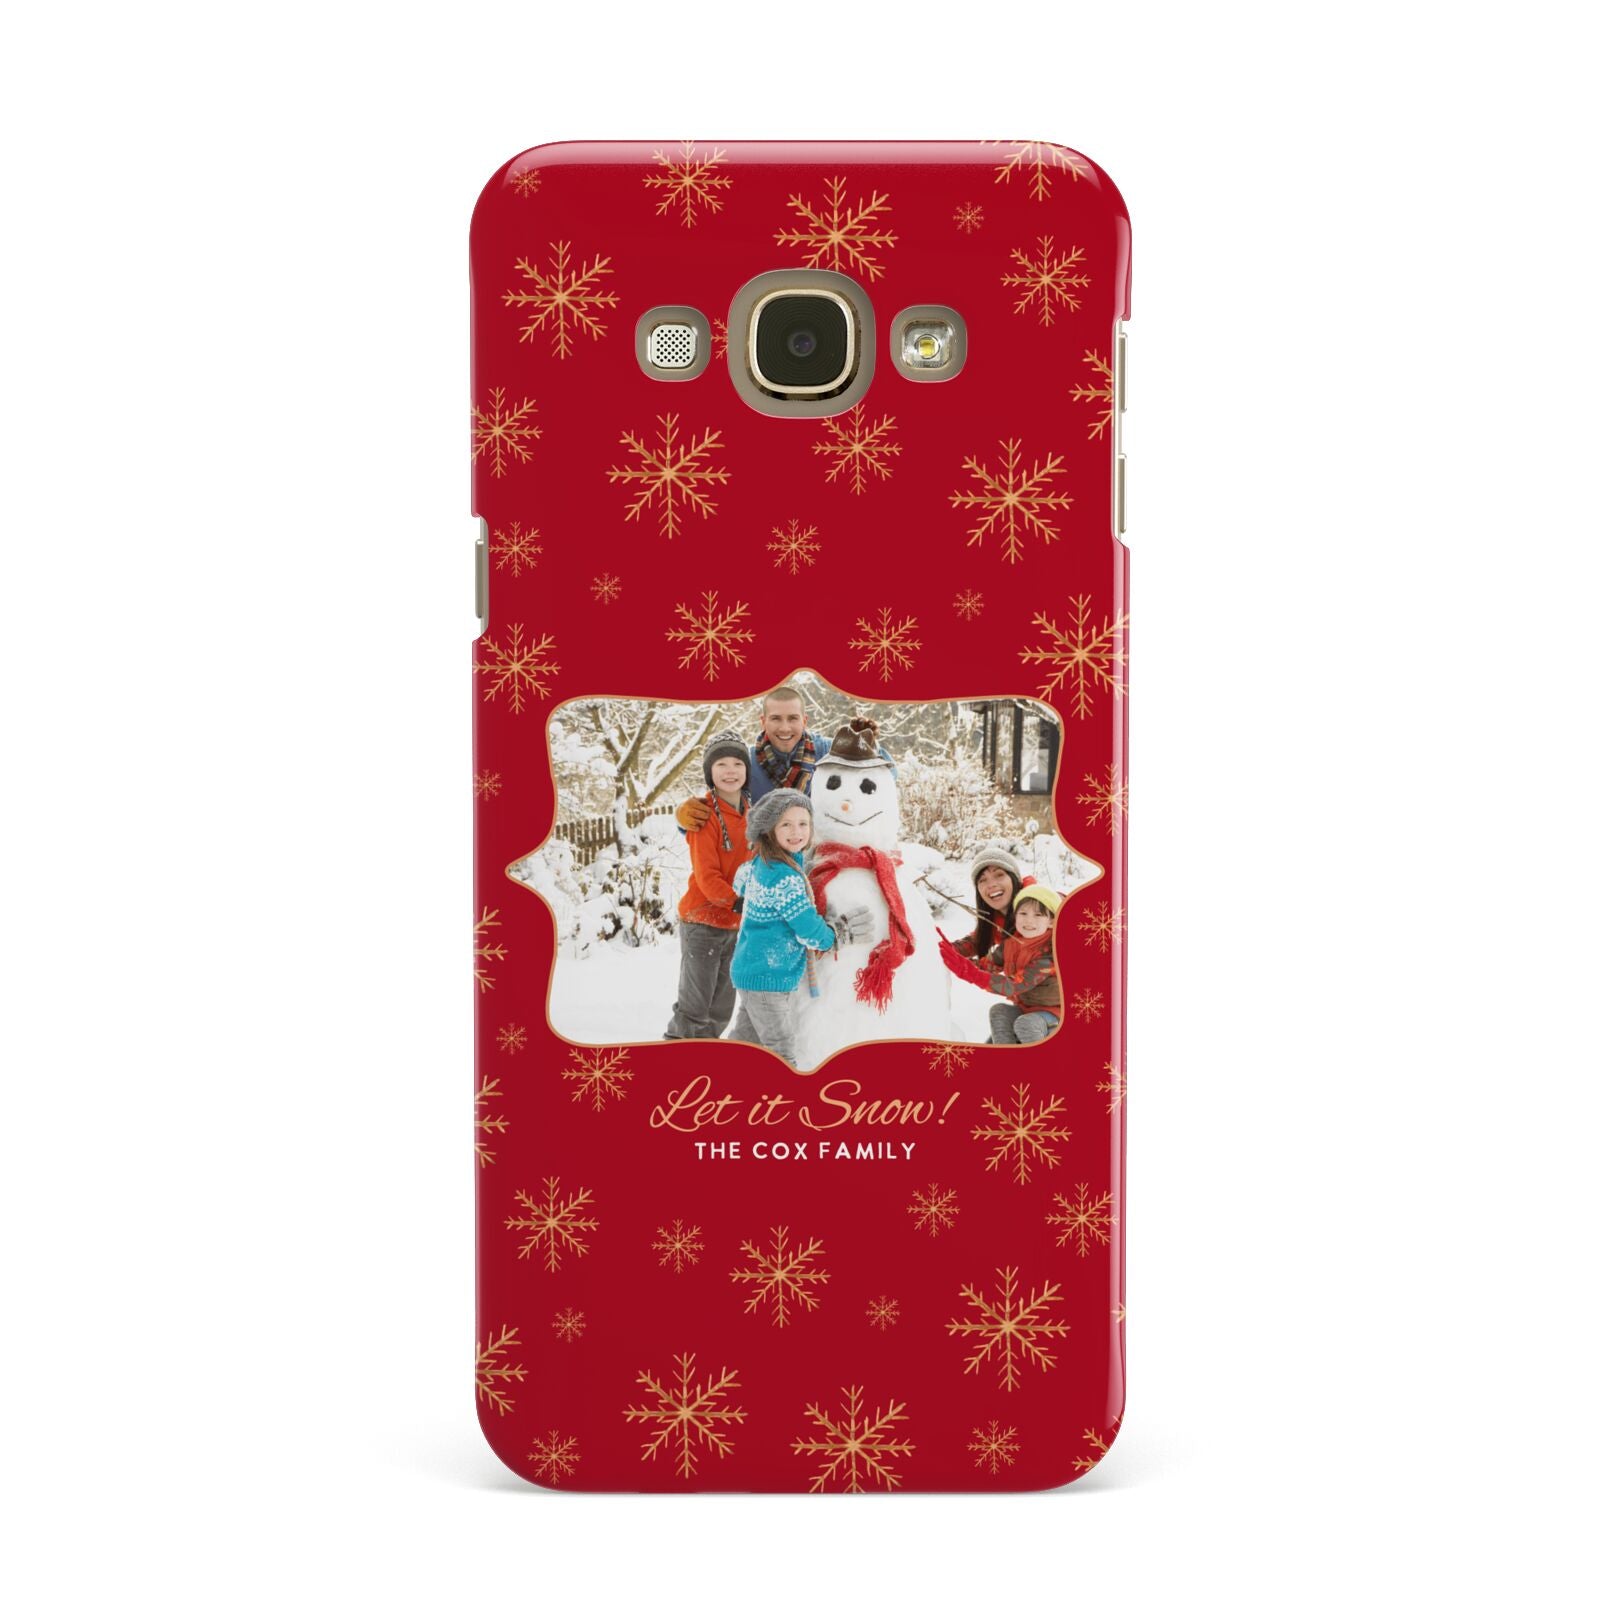 Let it Snow Christmas Photo Upload Samsung Galaxy A8 Case